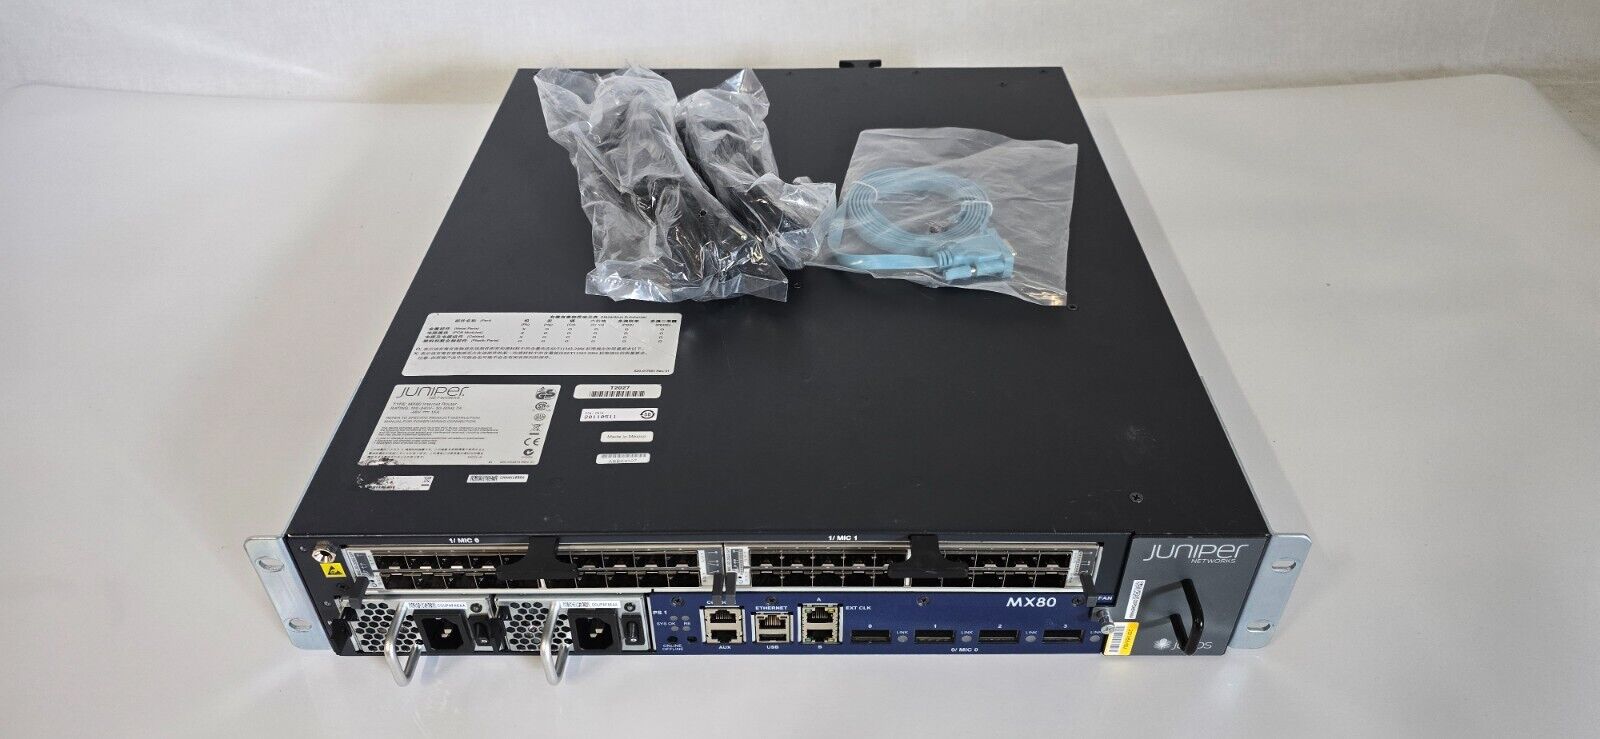 Juniper MX80-AC Router 4 Port XFP 10G w/Fan Tray and AC PSU 2 x MIC-3D-20GE-SFP